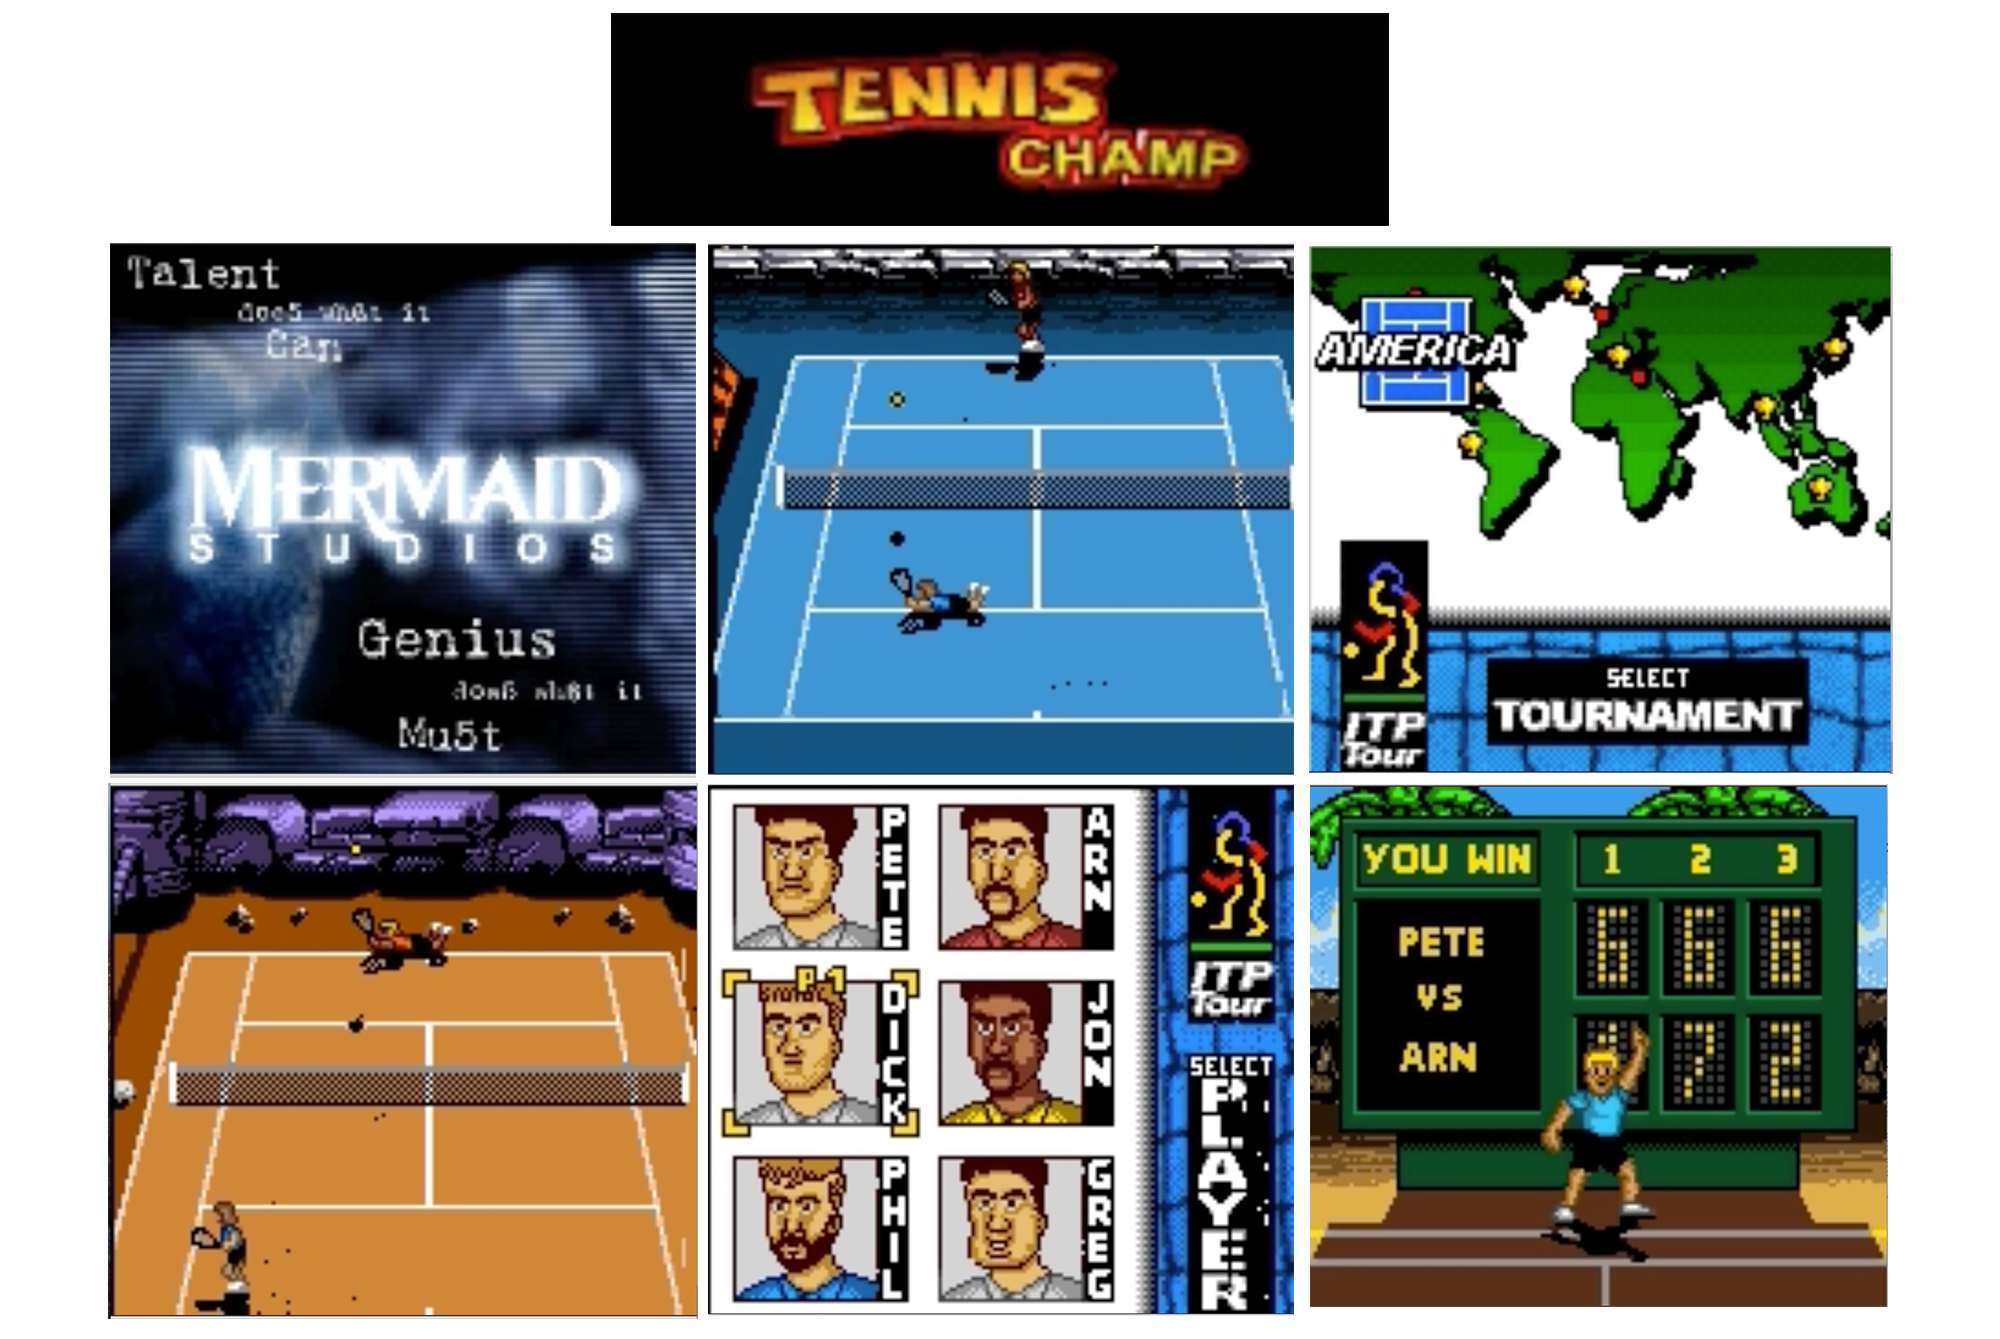 Images from the Tennis Champ Game. Title Card, Map Screen, Player Select, Scoreboard, Gameplay on two courts.